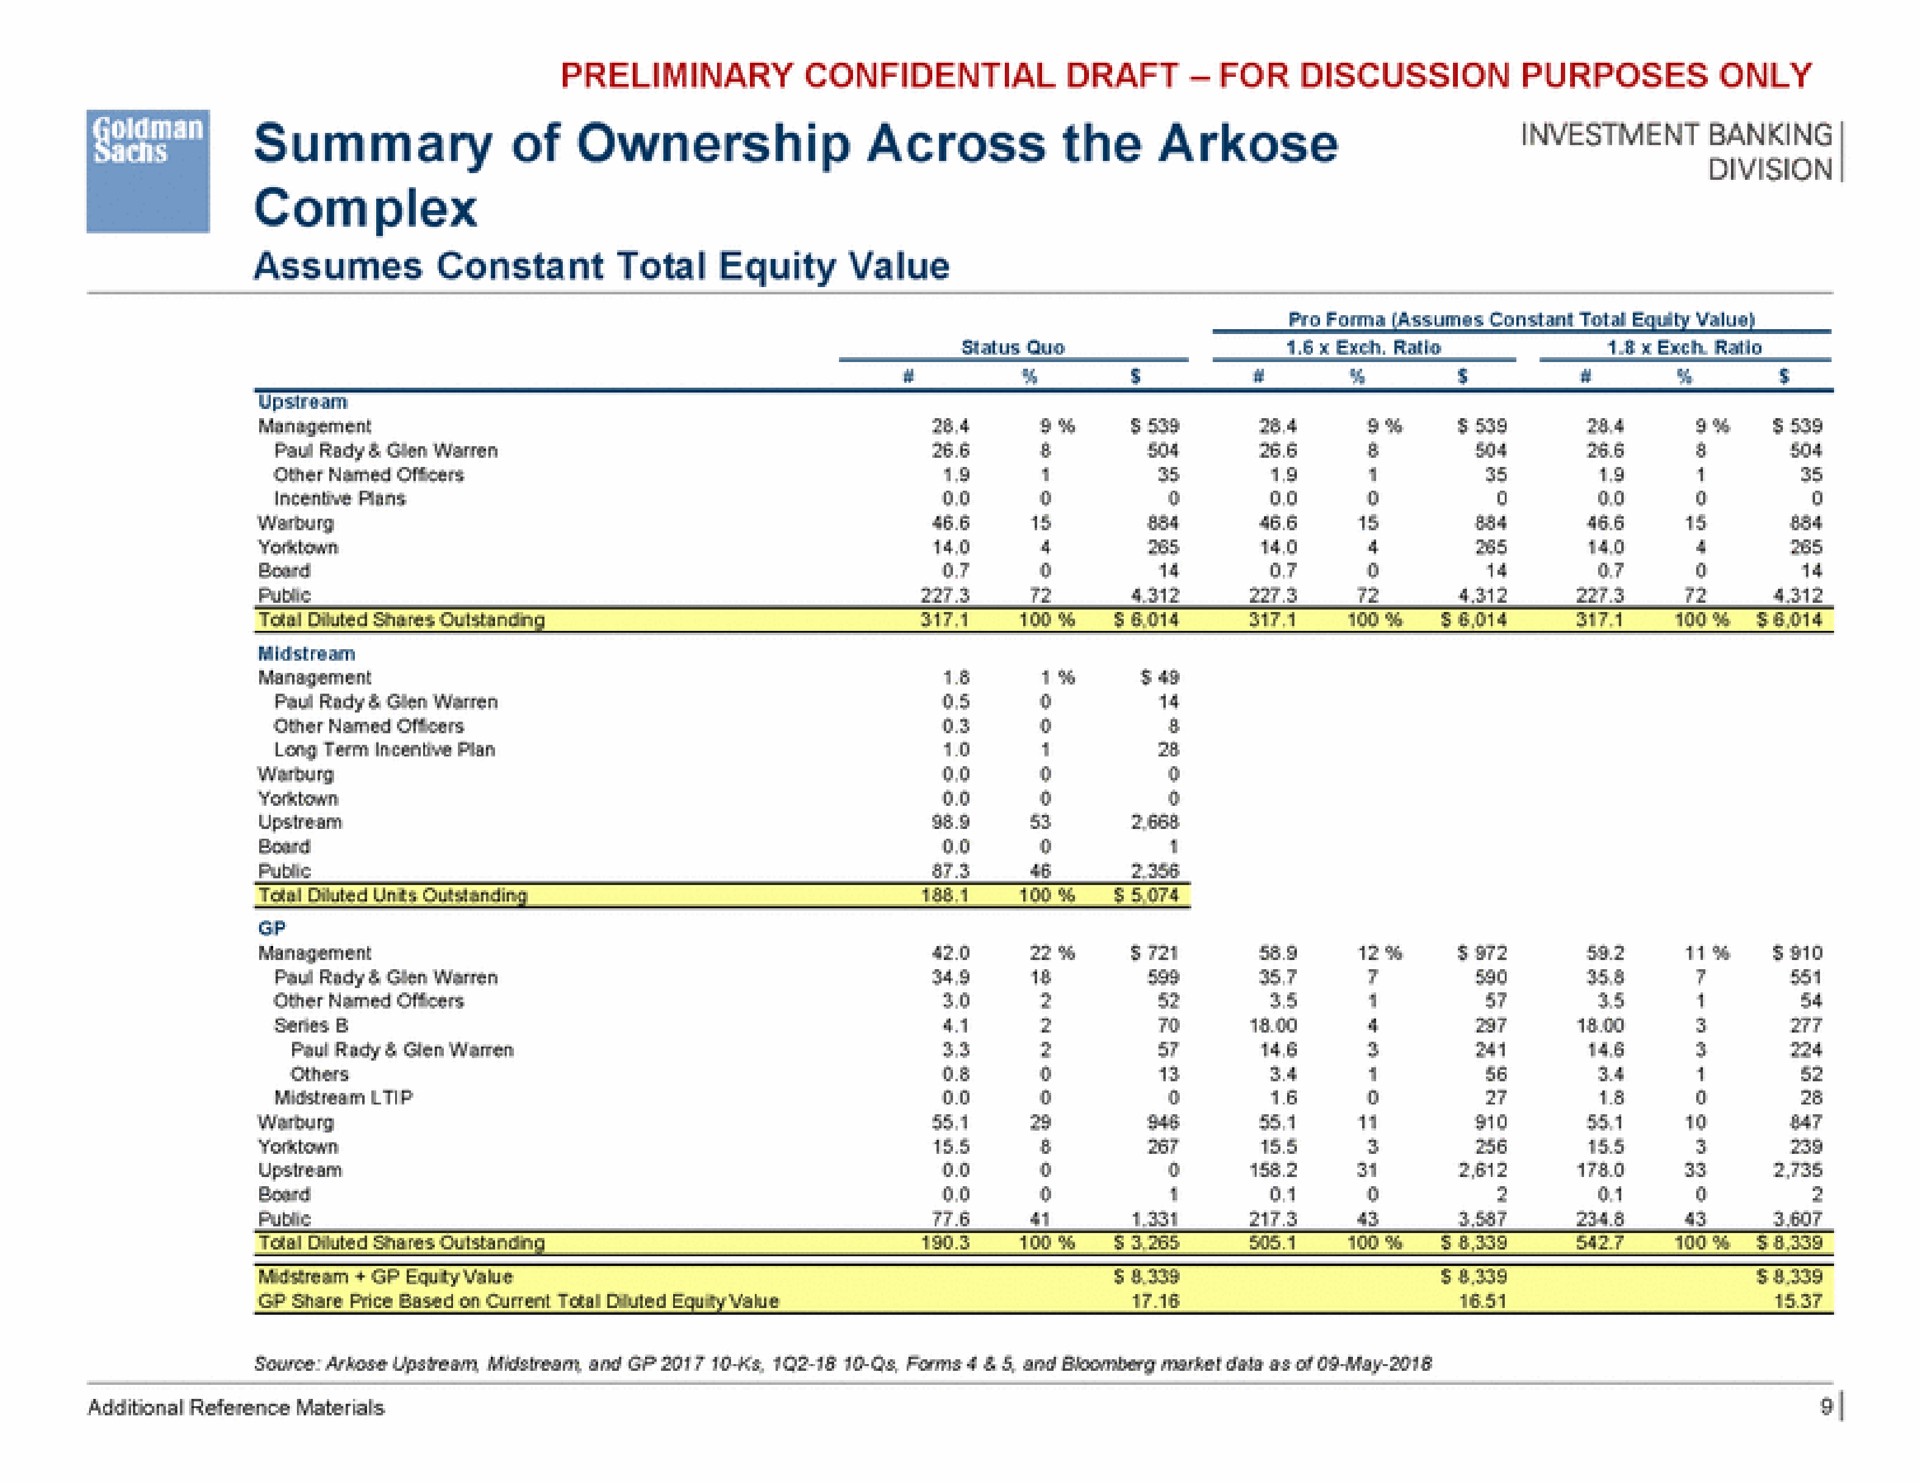 summary of ownership across the arkose complex | Goldman Sachs